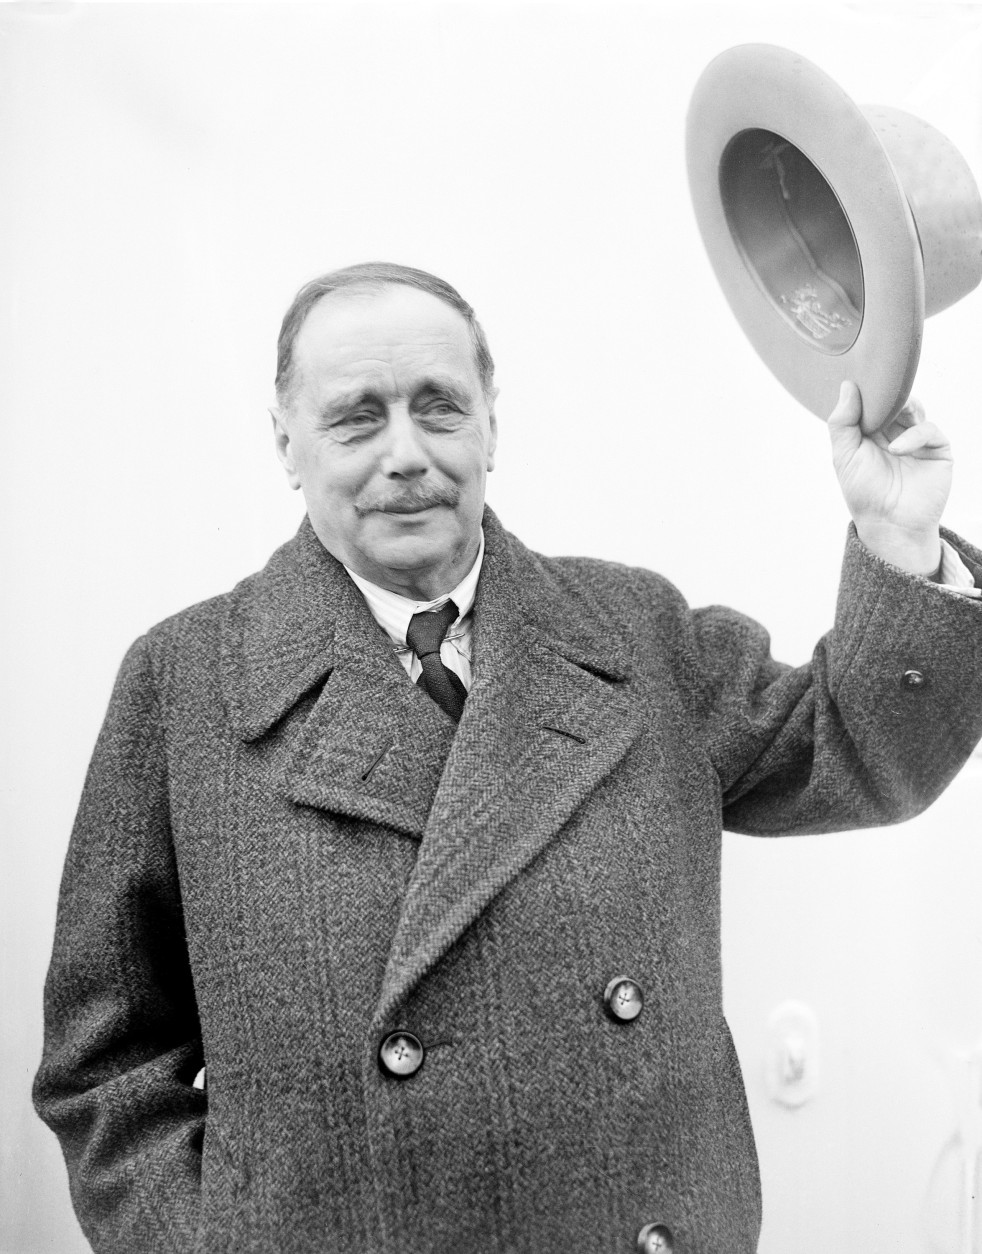 On this date in 1946, author H.G. Wells, 79, died in London. Here, Wells waves with his hat as he arrives aboard the SS Washington in New York City on May 3, 1934. (AP Photo)